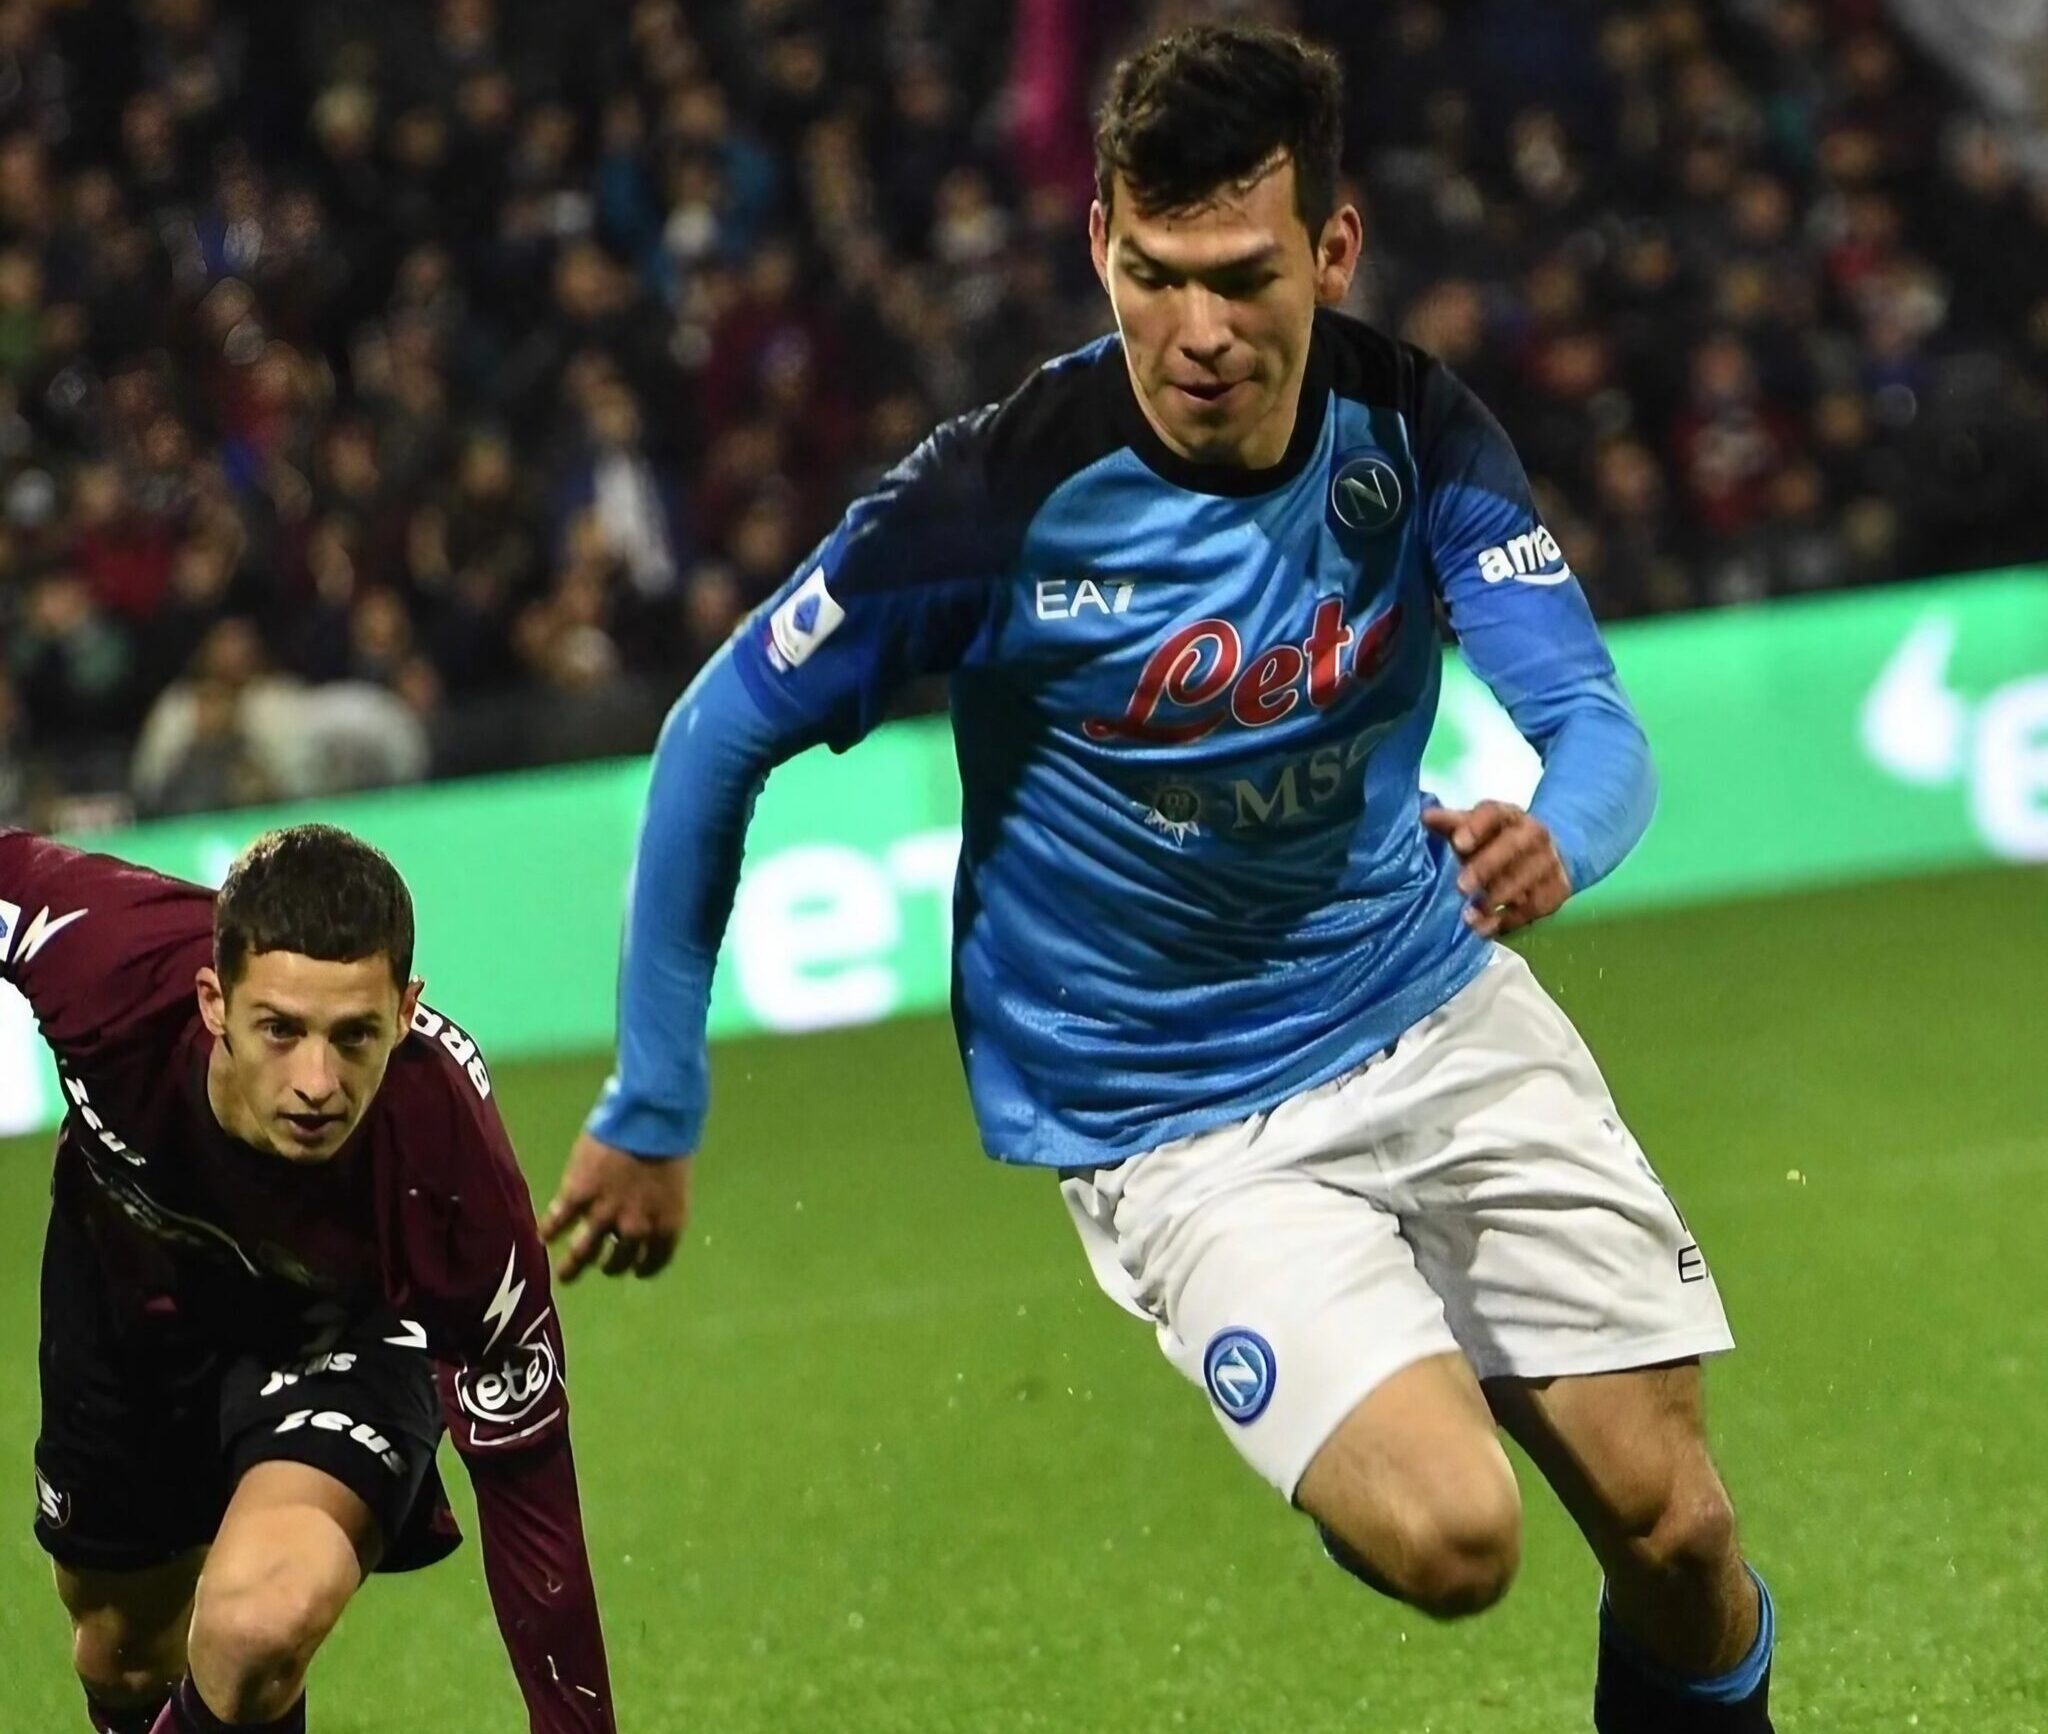 Lozano, SSC Napoli player, in action against a Salernitana player